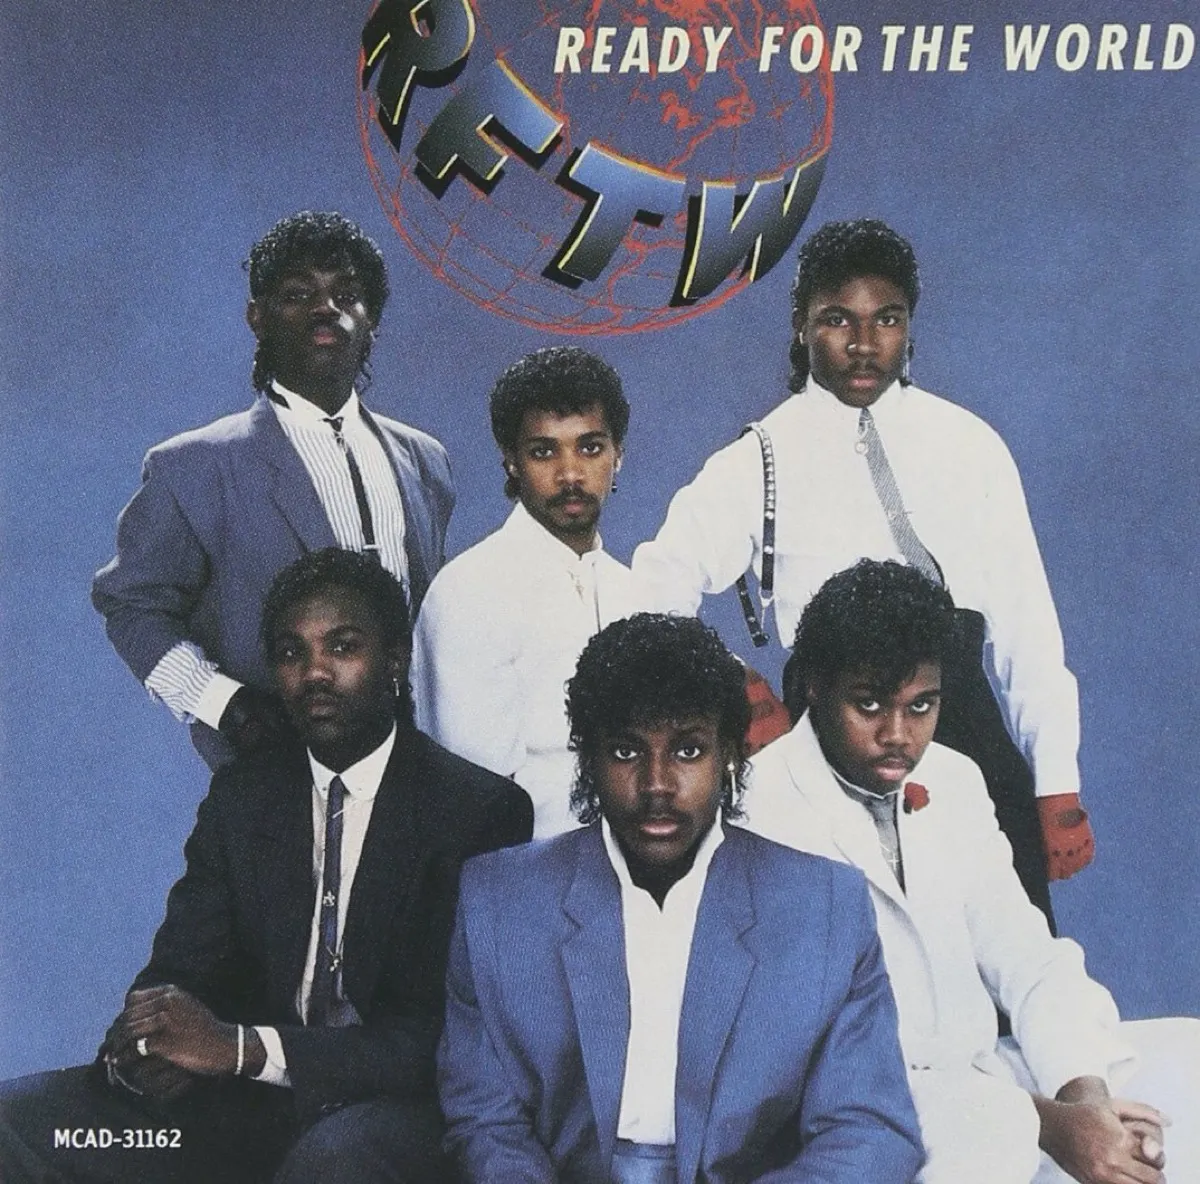 album cover of ready for the world's self-titled album